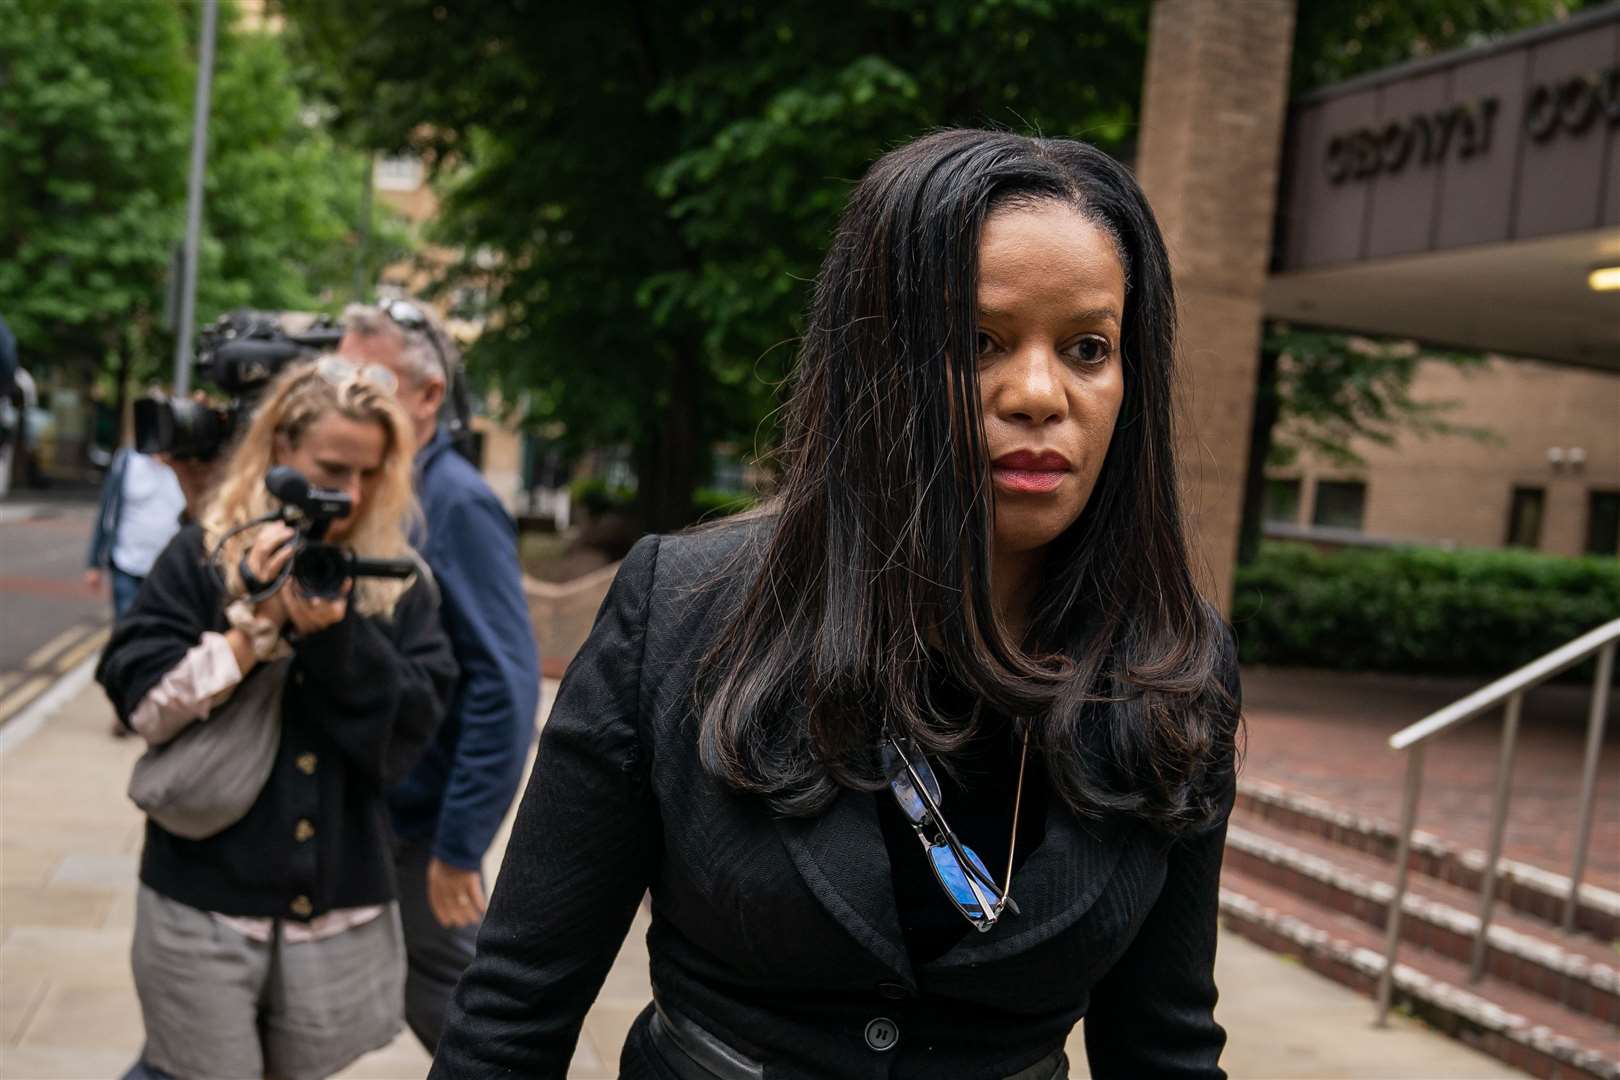 MP Claudia Webbe lost the Labour whip after being charged with harassment in 2020 (Aaron Chown/PA)